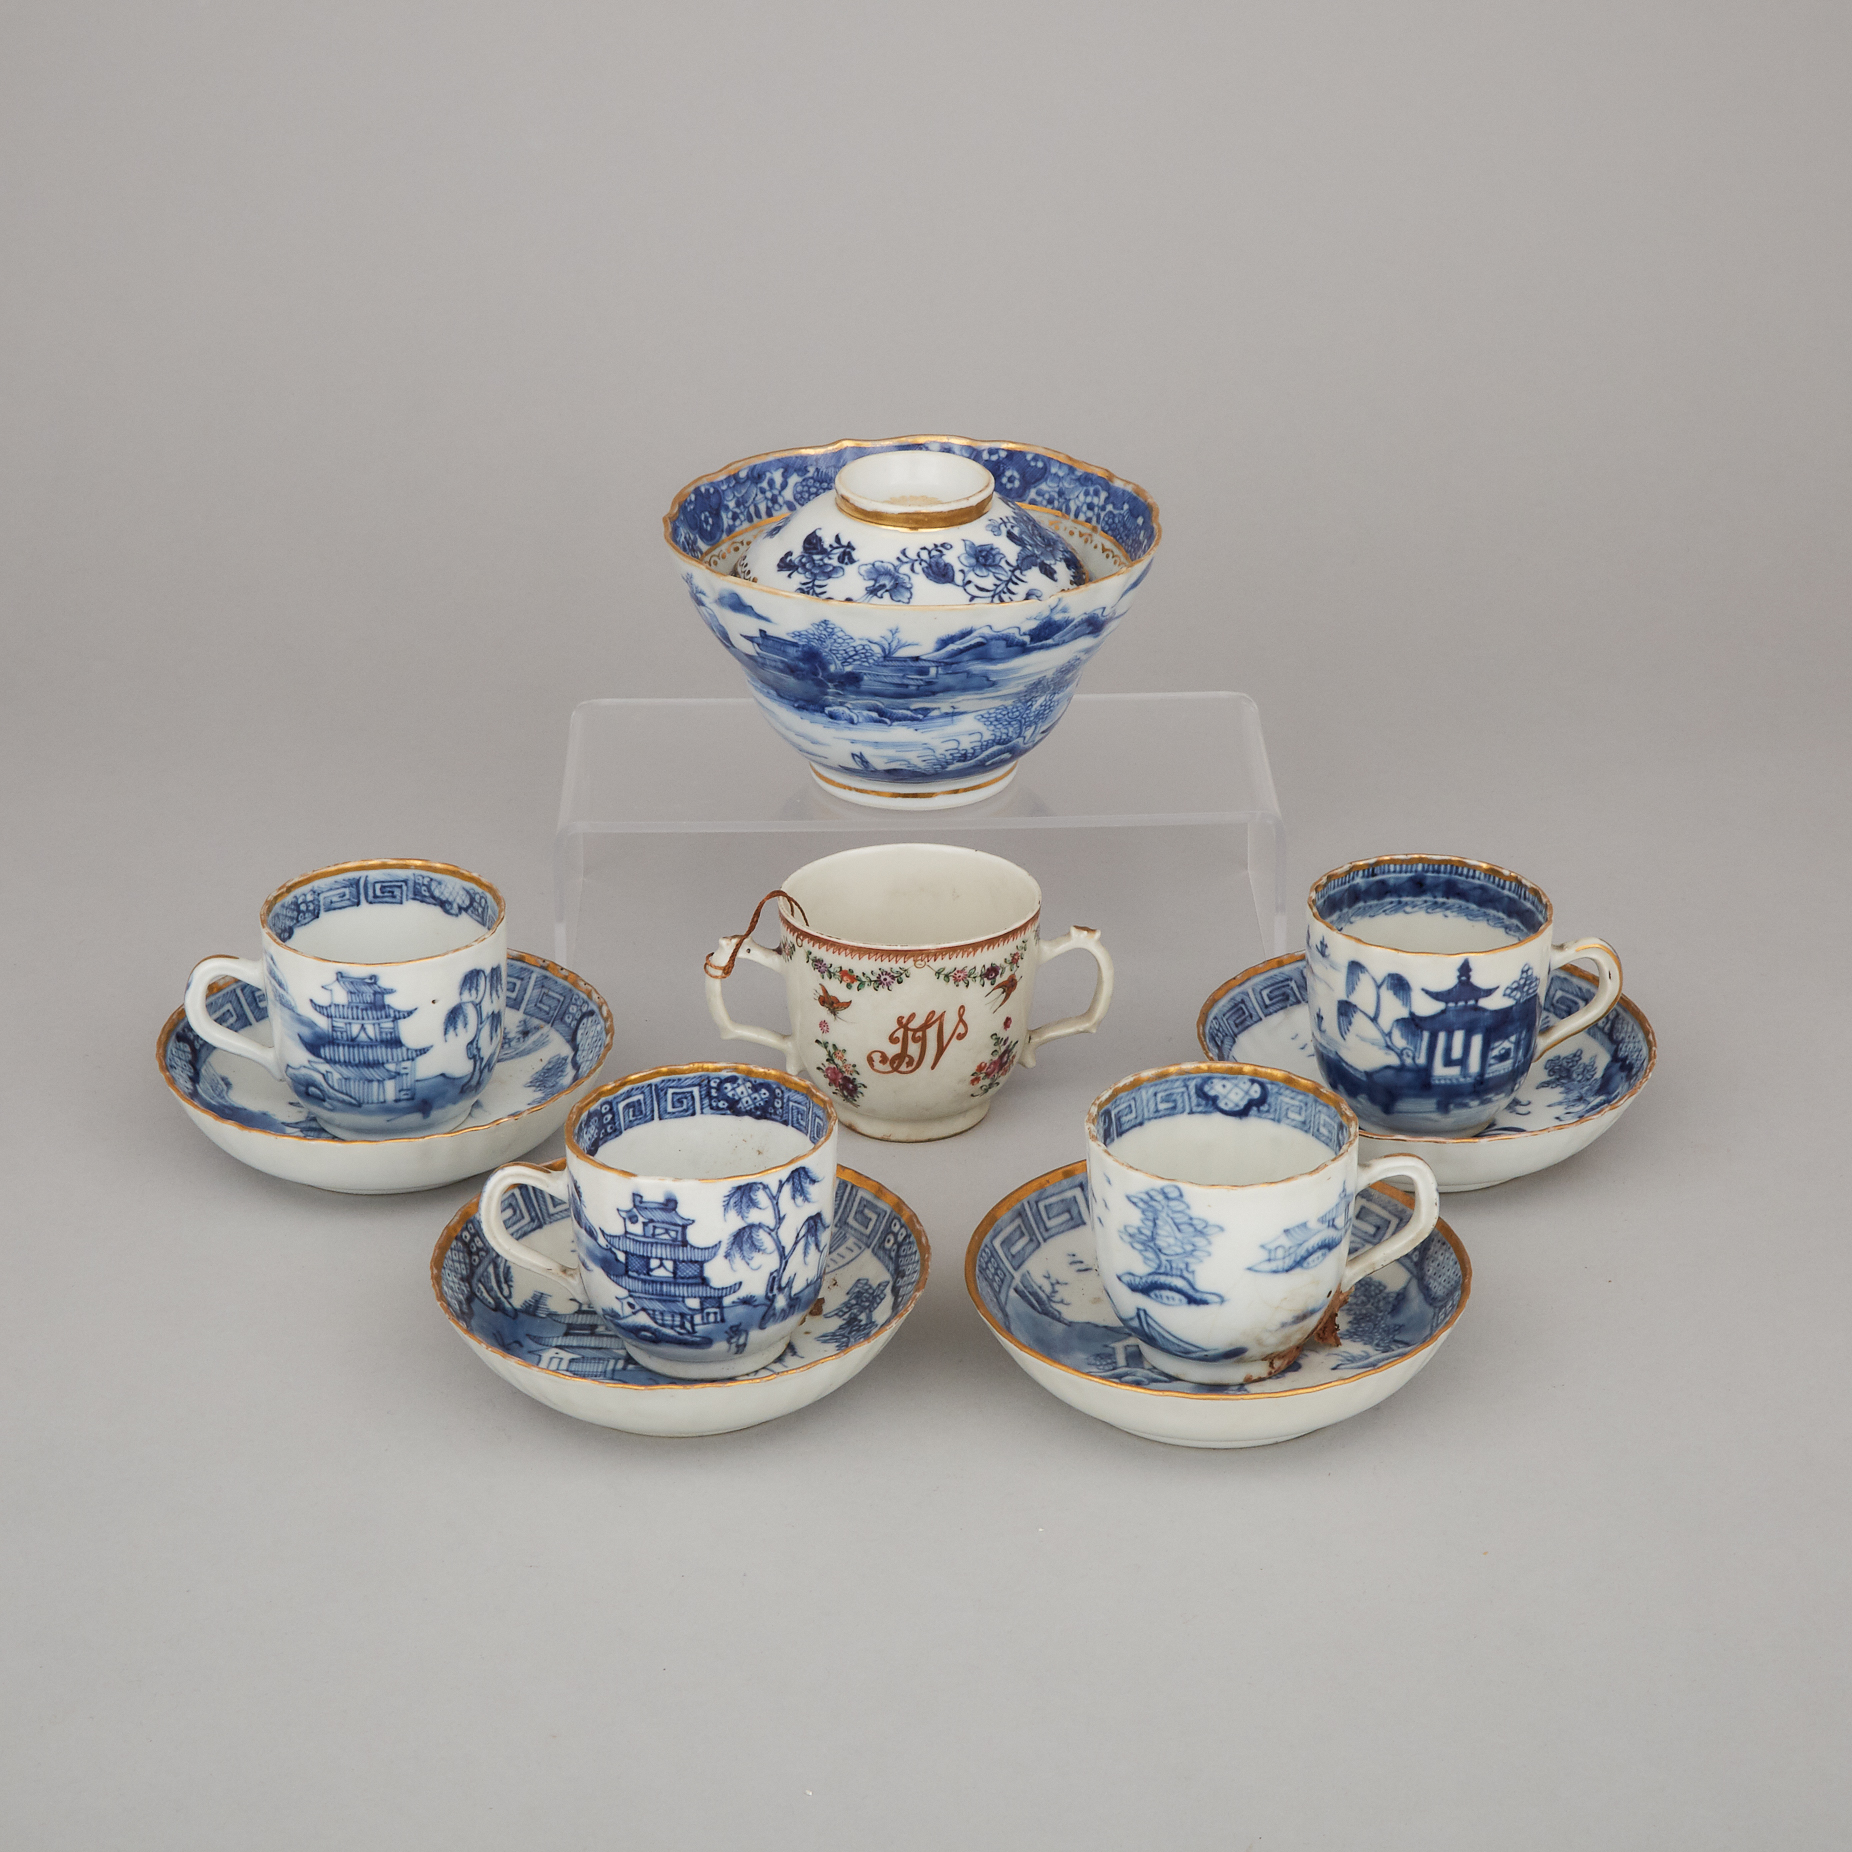 A Group of Nine Export Gilt Decorated Blue and White Porcelain Wares, 19th Century